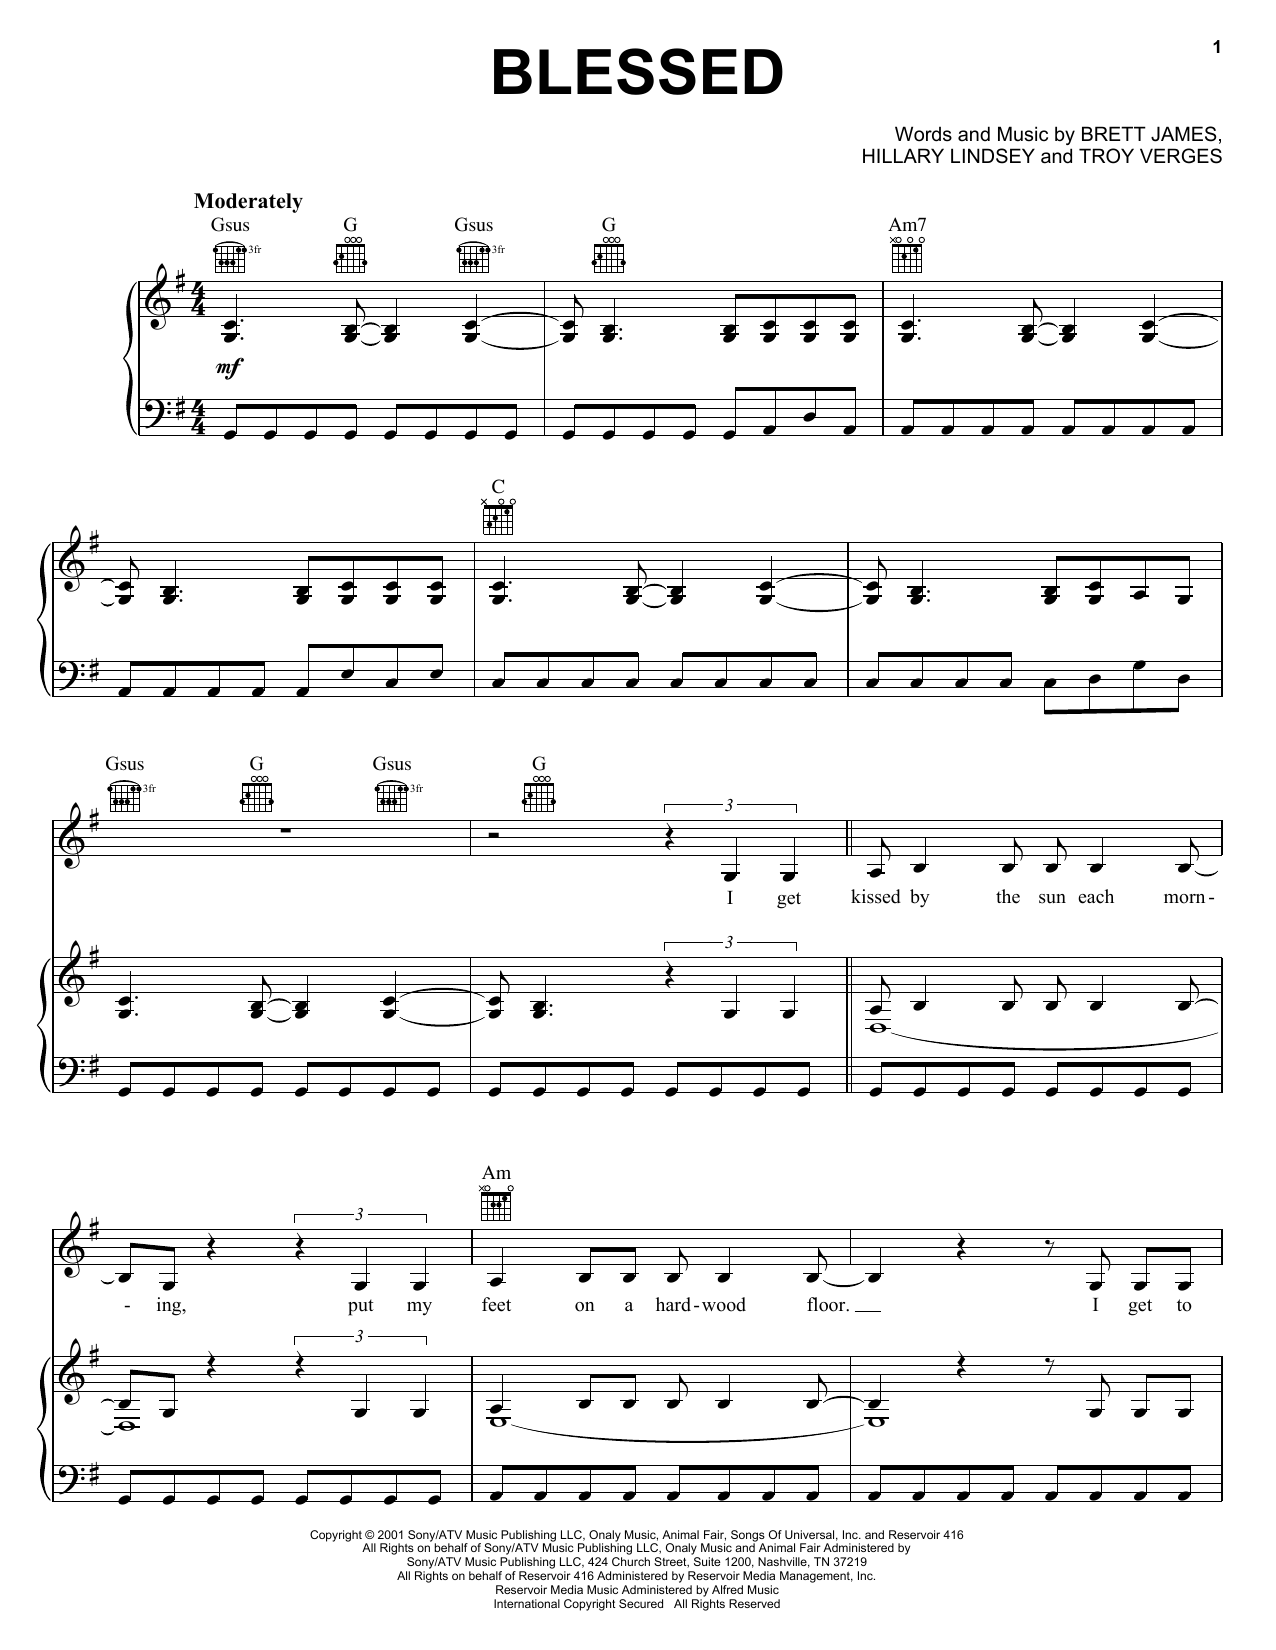 Martina McBride Blessed sheet music notes and chords. Download Printable PDF.